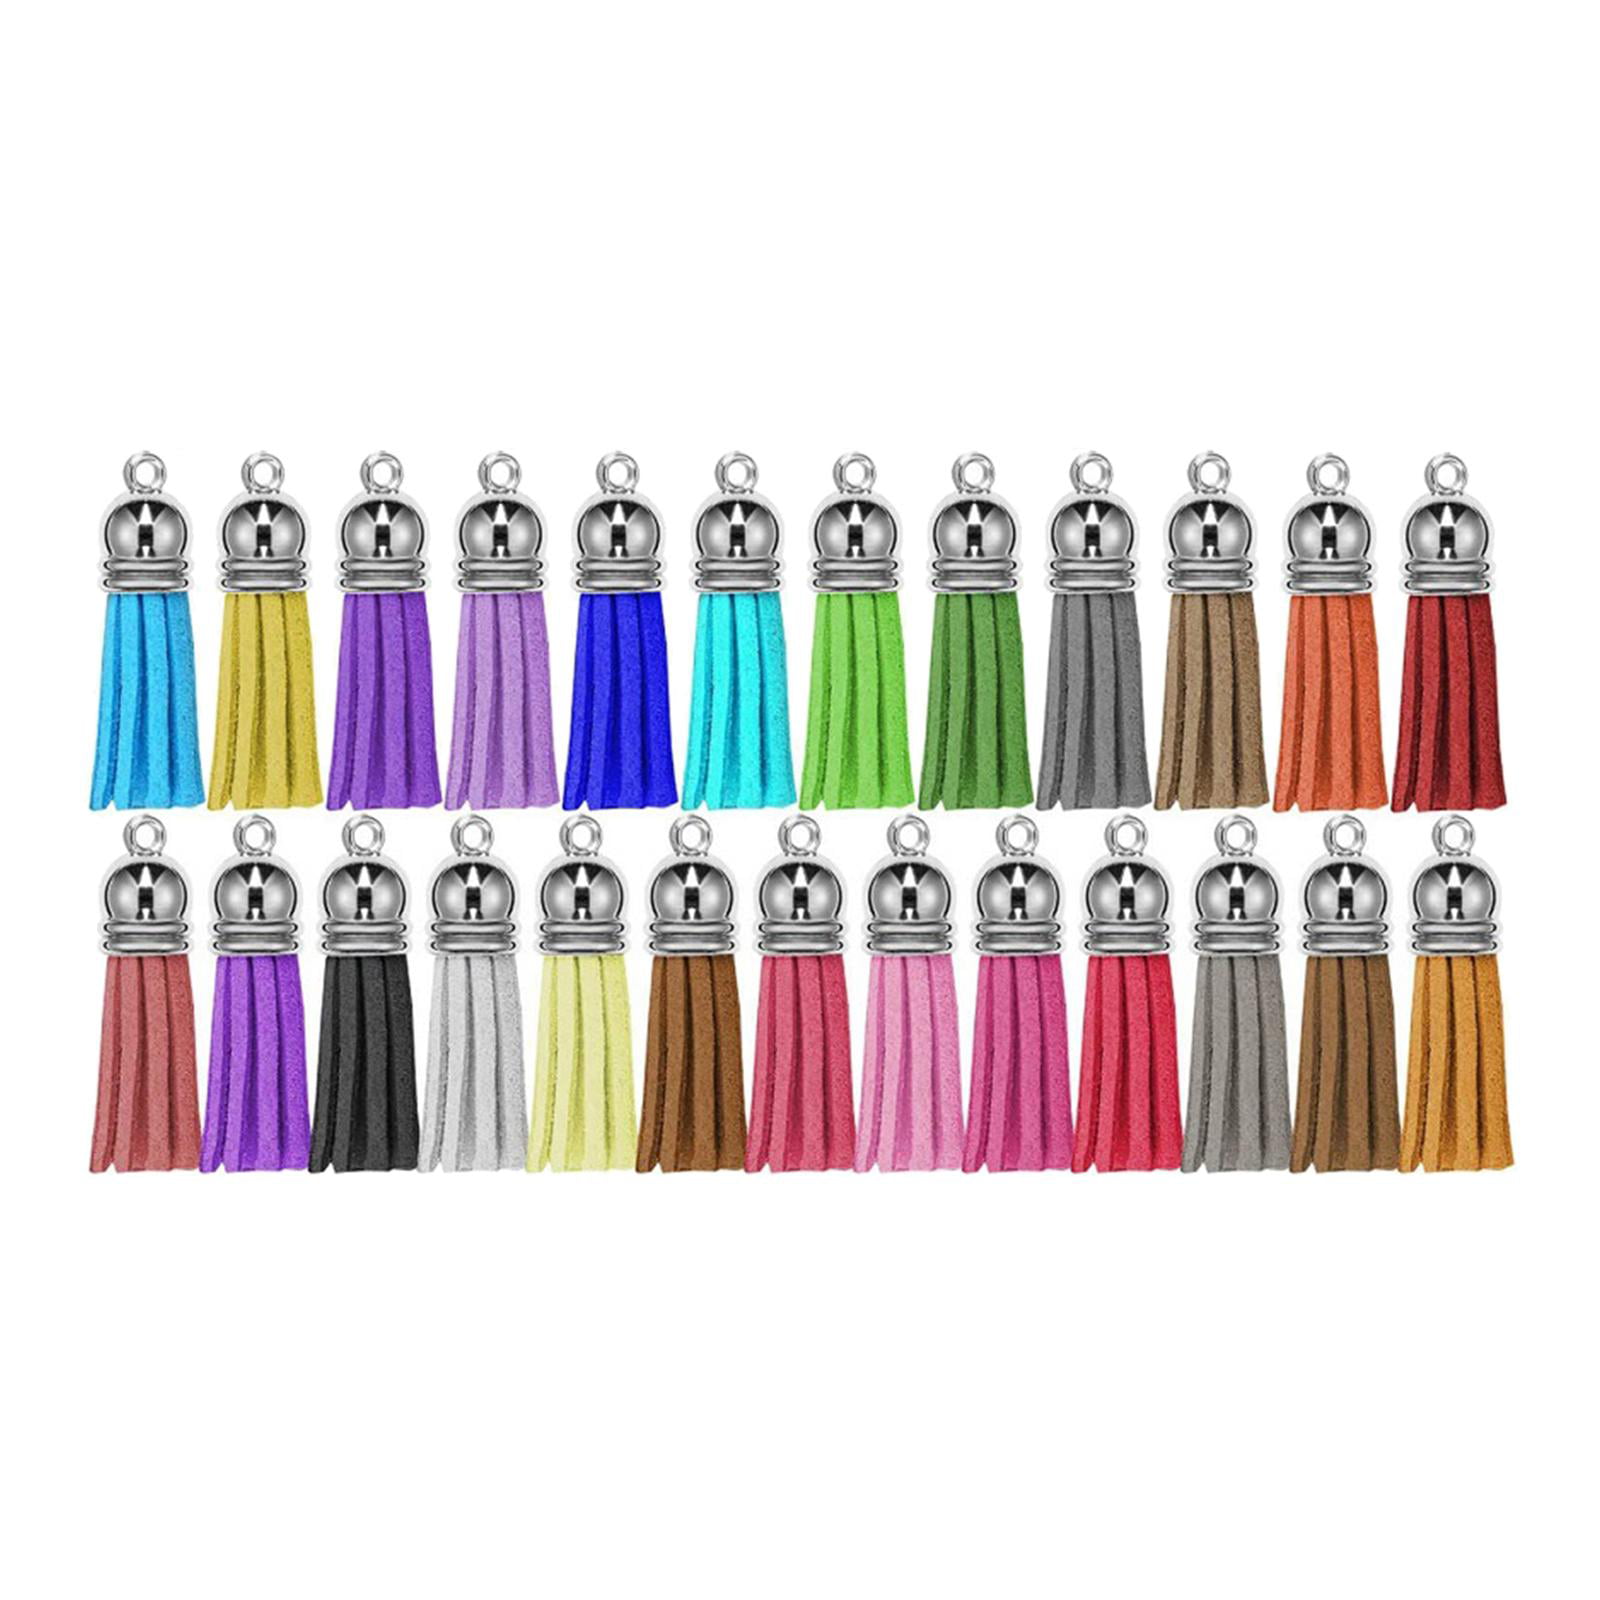 Wholesale SUNNYCLUE 100Pcs Faux Leather Suede Tassels Leather Tassel Charms  Bulk for Keychain Decoration with CCB Plastic Cord Ends for DIY Jewelry  Making Bookmarks Bag Decor Supplies 